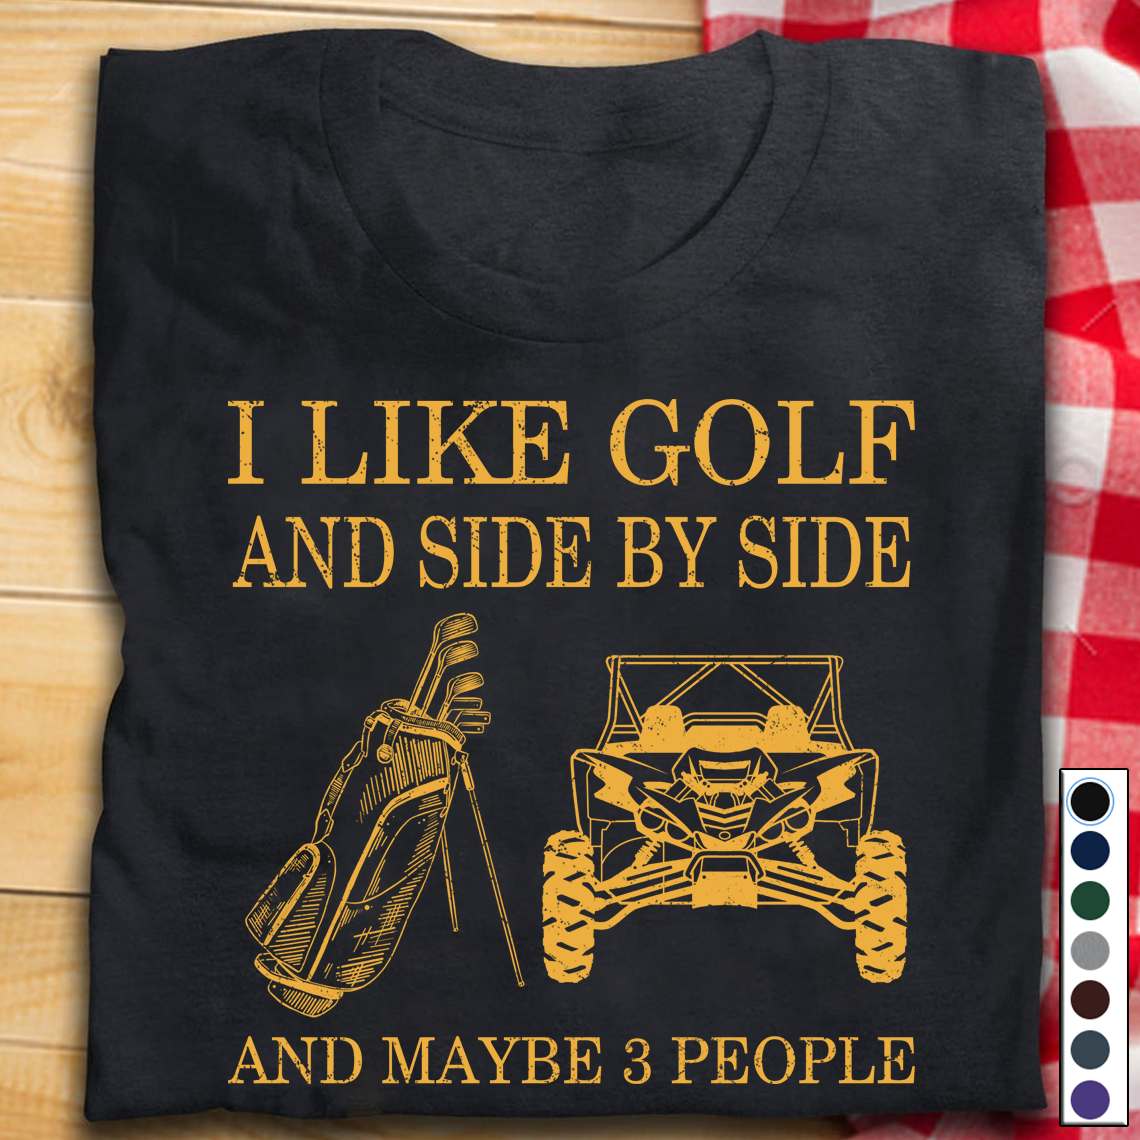 I like golf and side by side and maybe 3 people - Golf lover